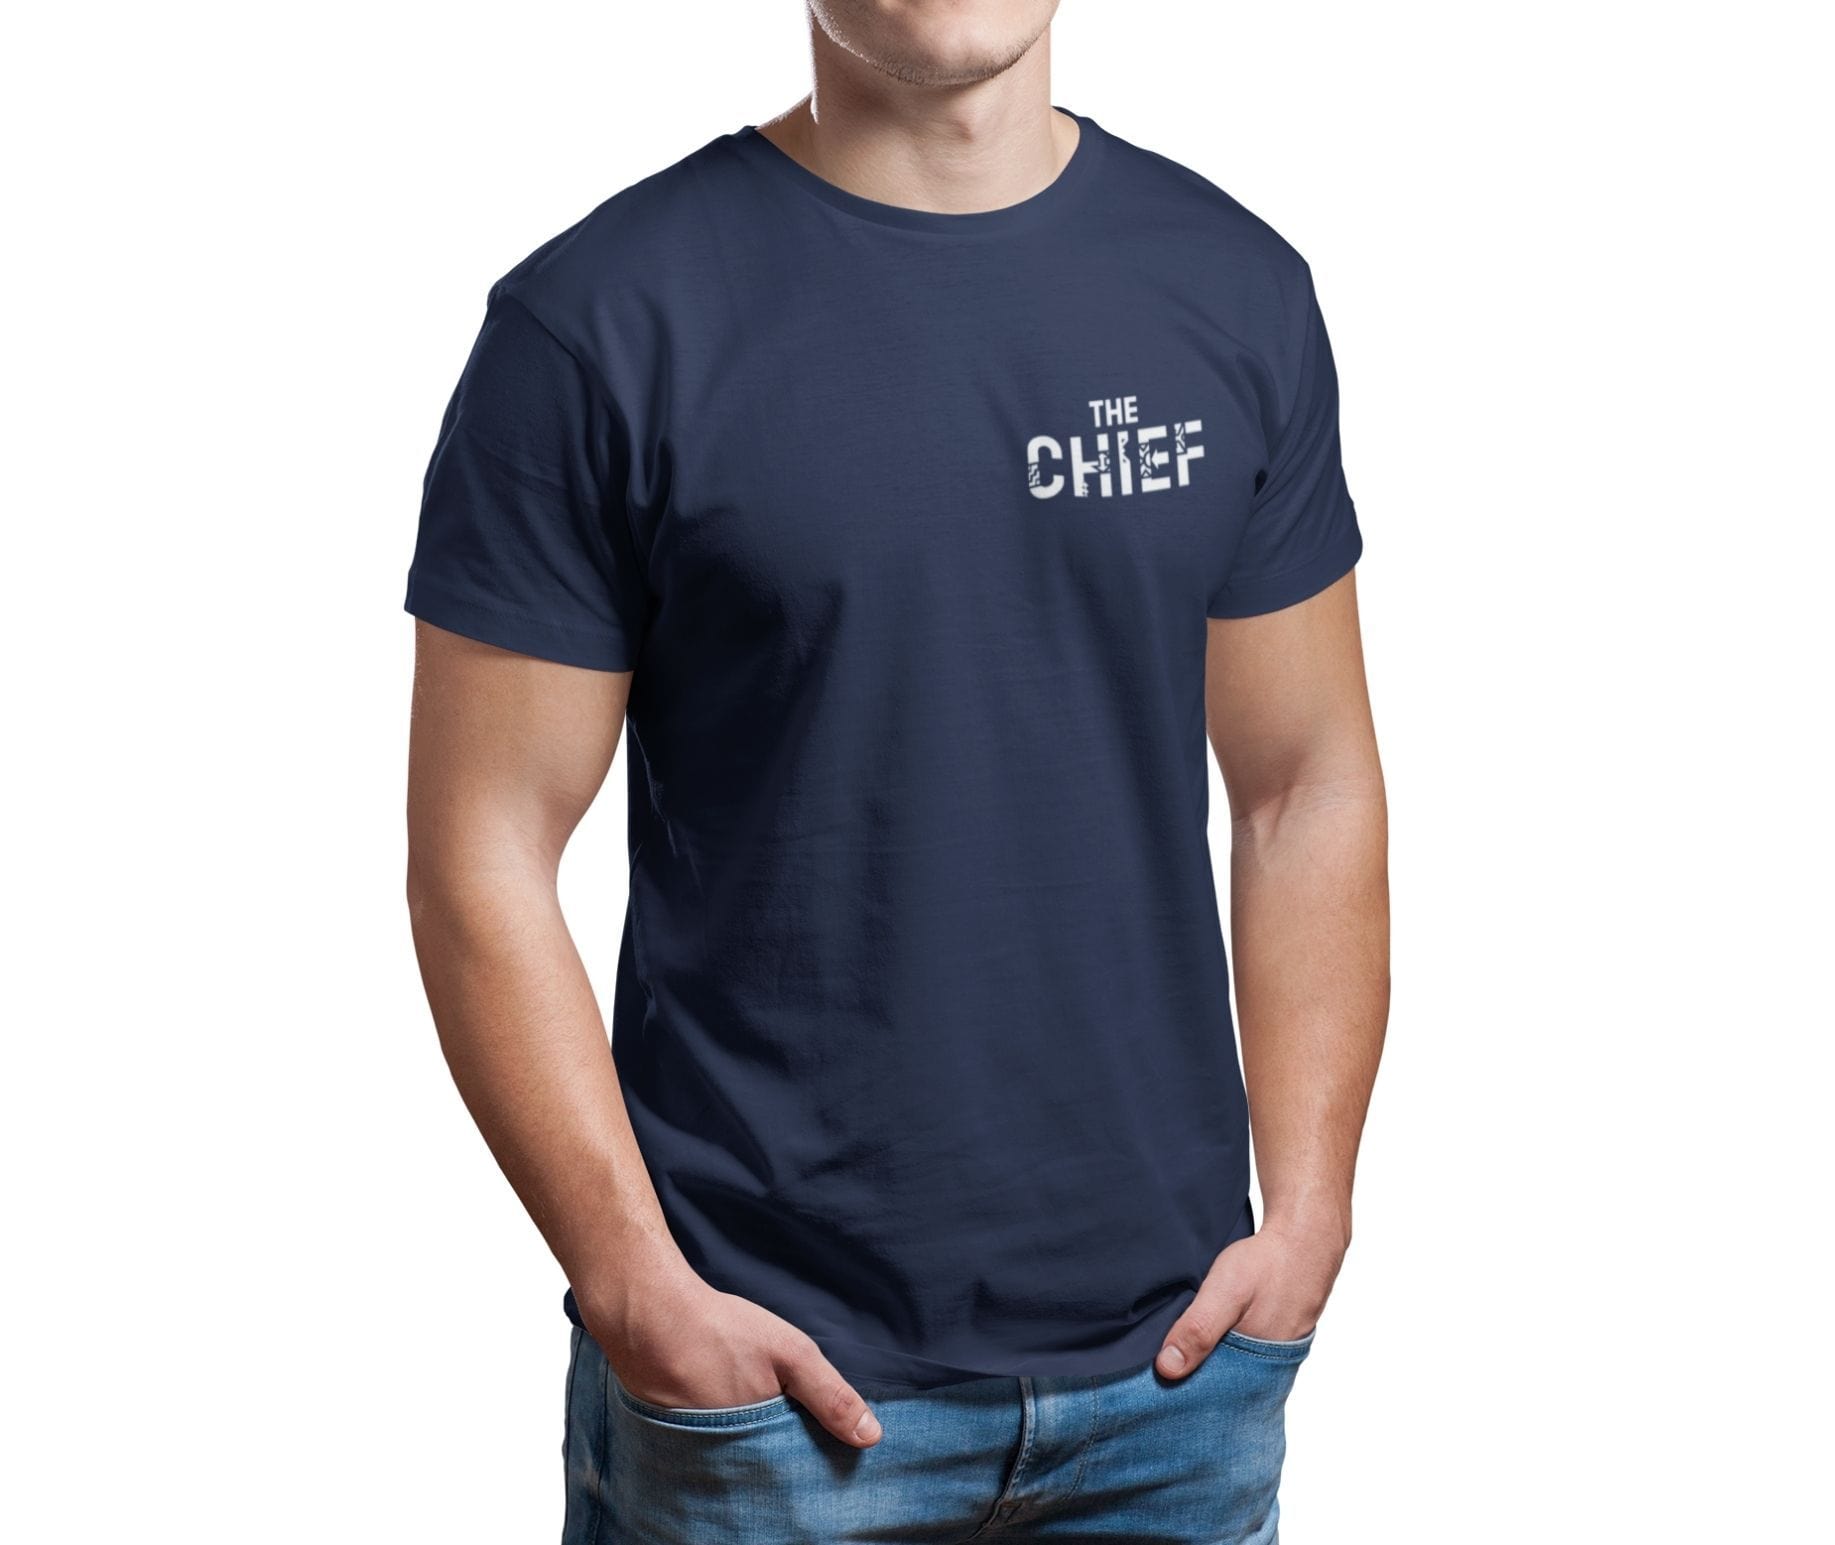 The Chief T-Shirt